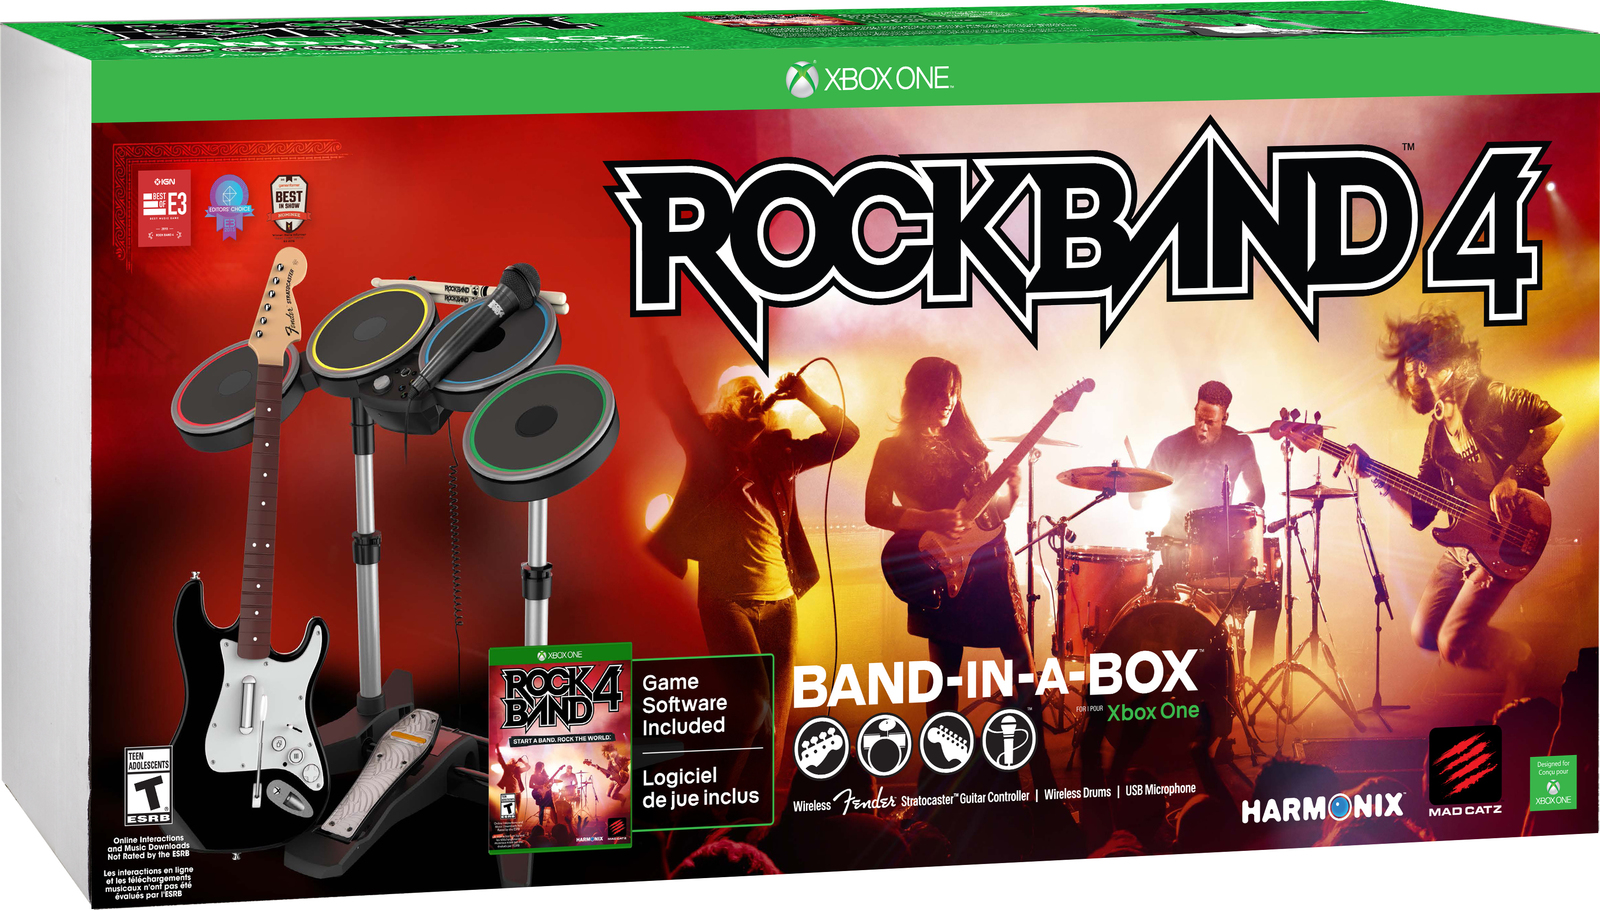 download free rock band 4 xbox one